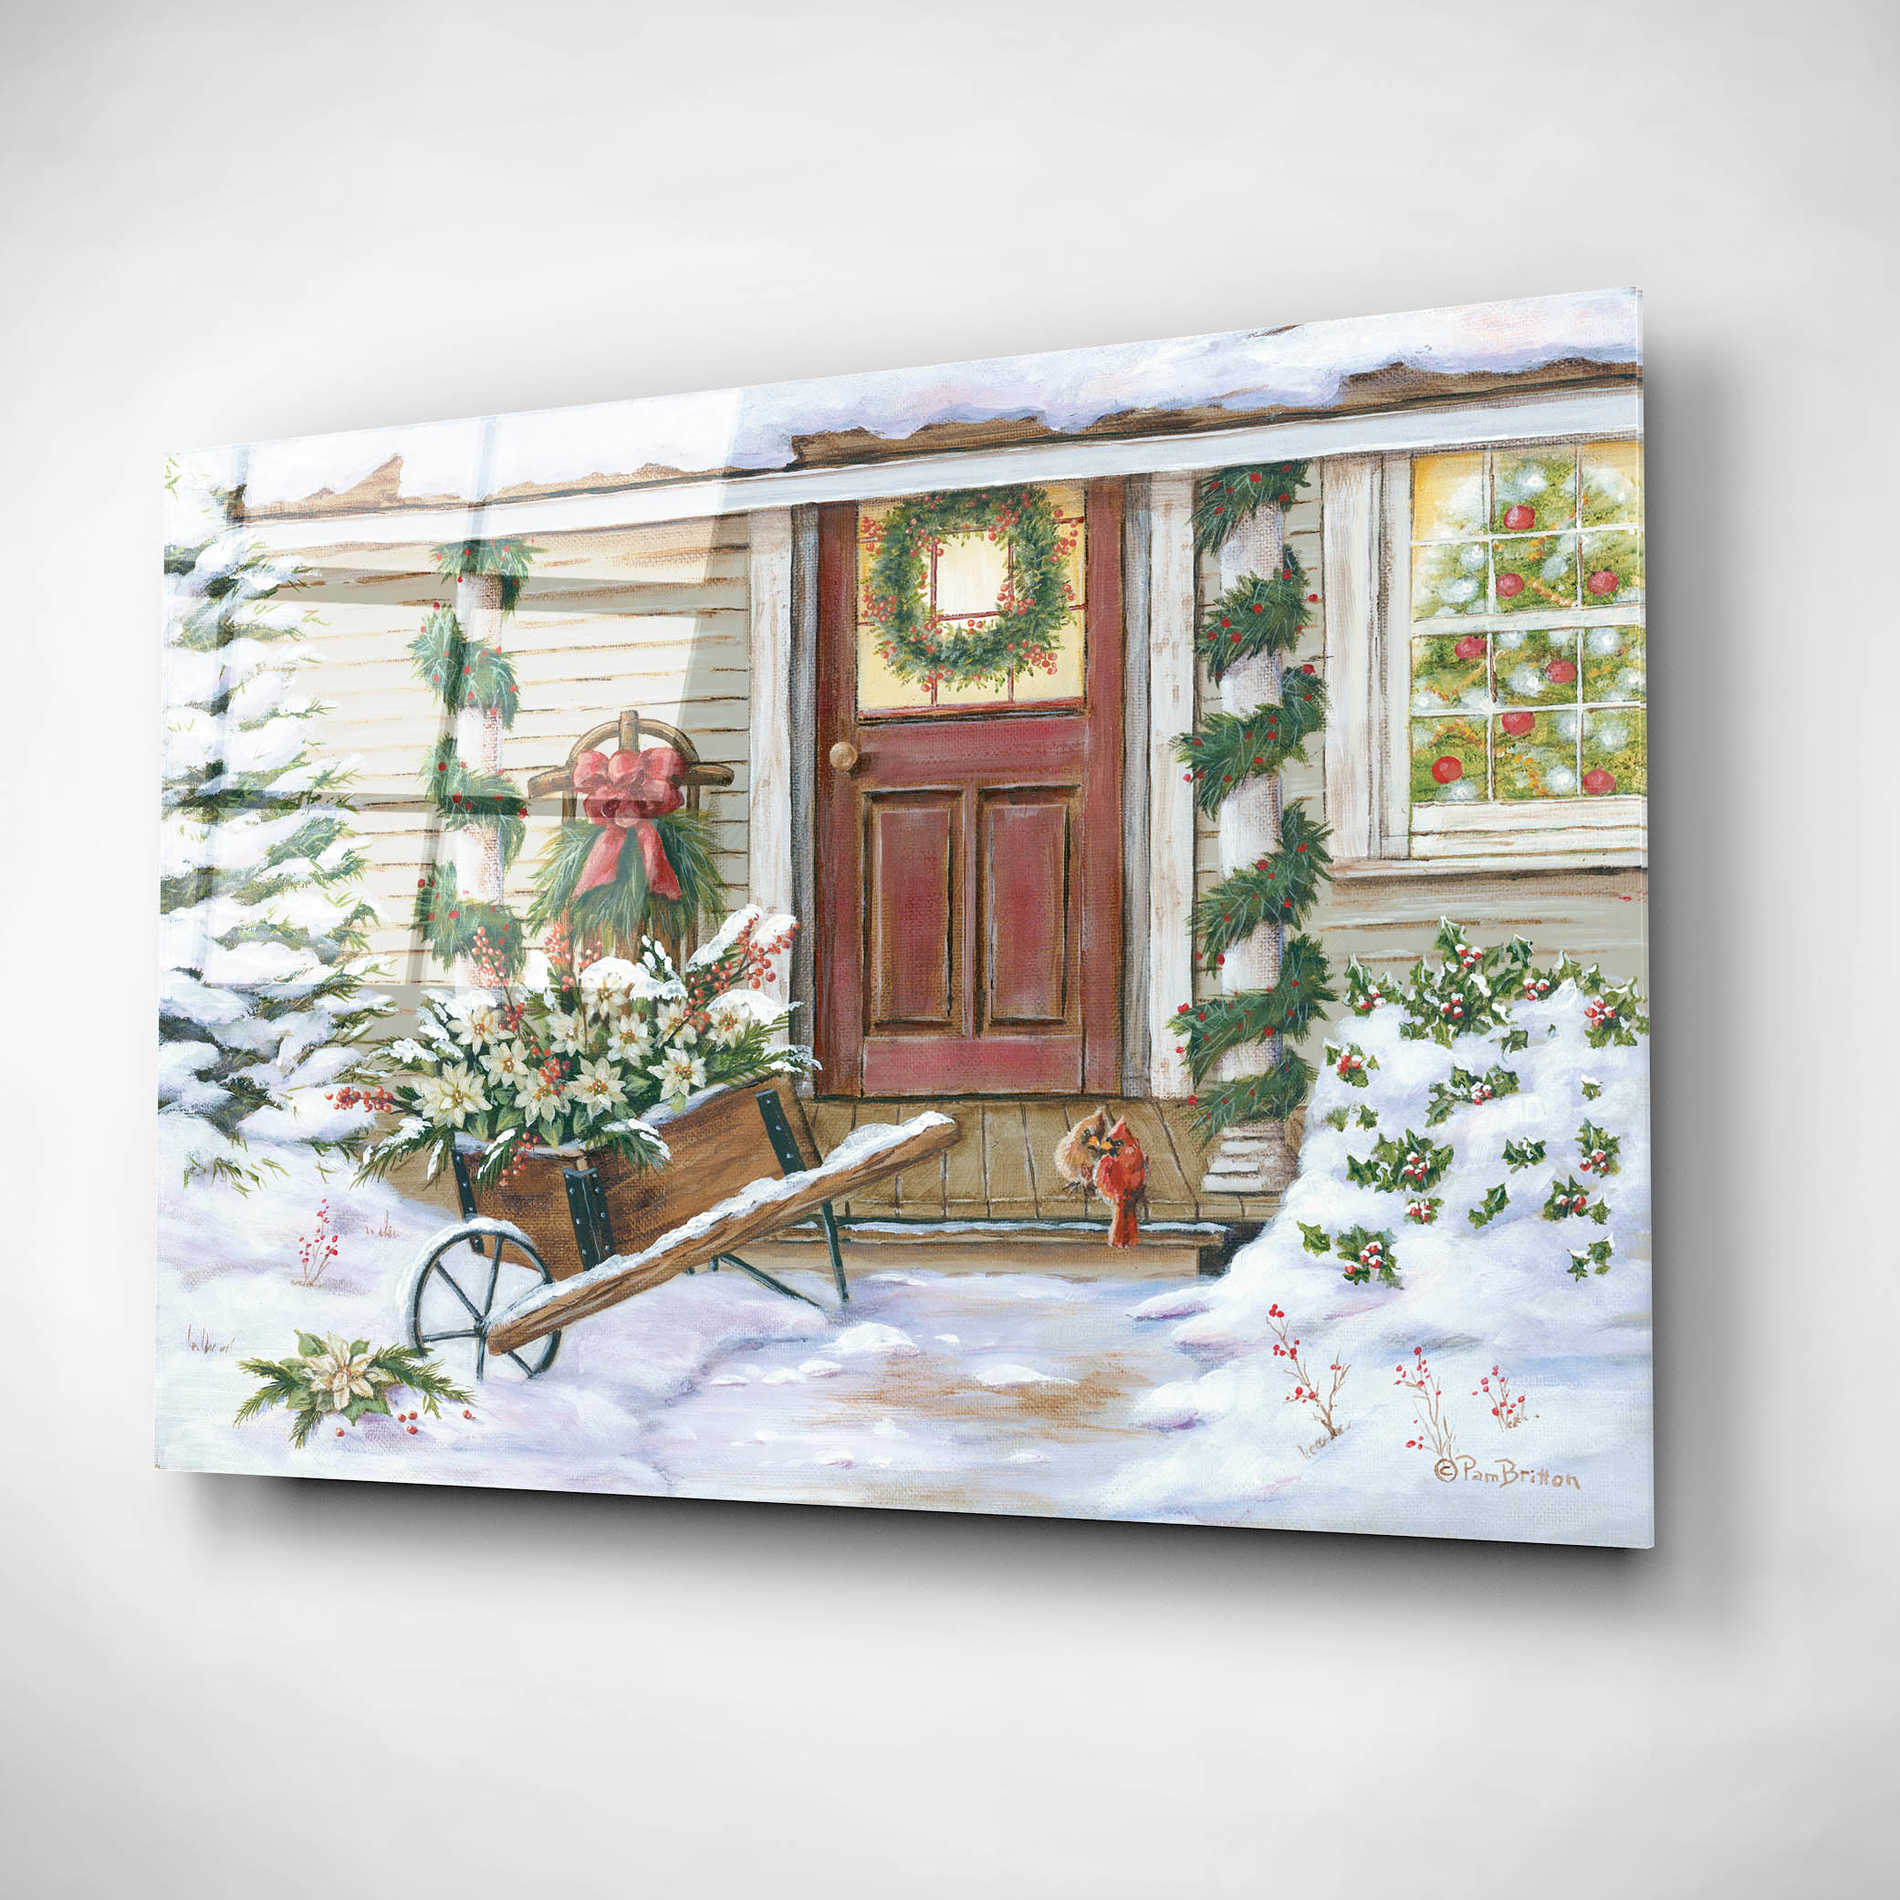 Epic Art 'Holiday Porch' by Pam Britton, Acrylic Glass Wall Art,16x12